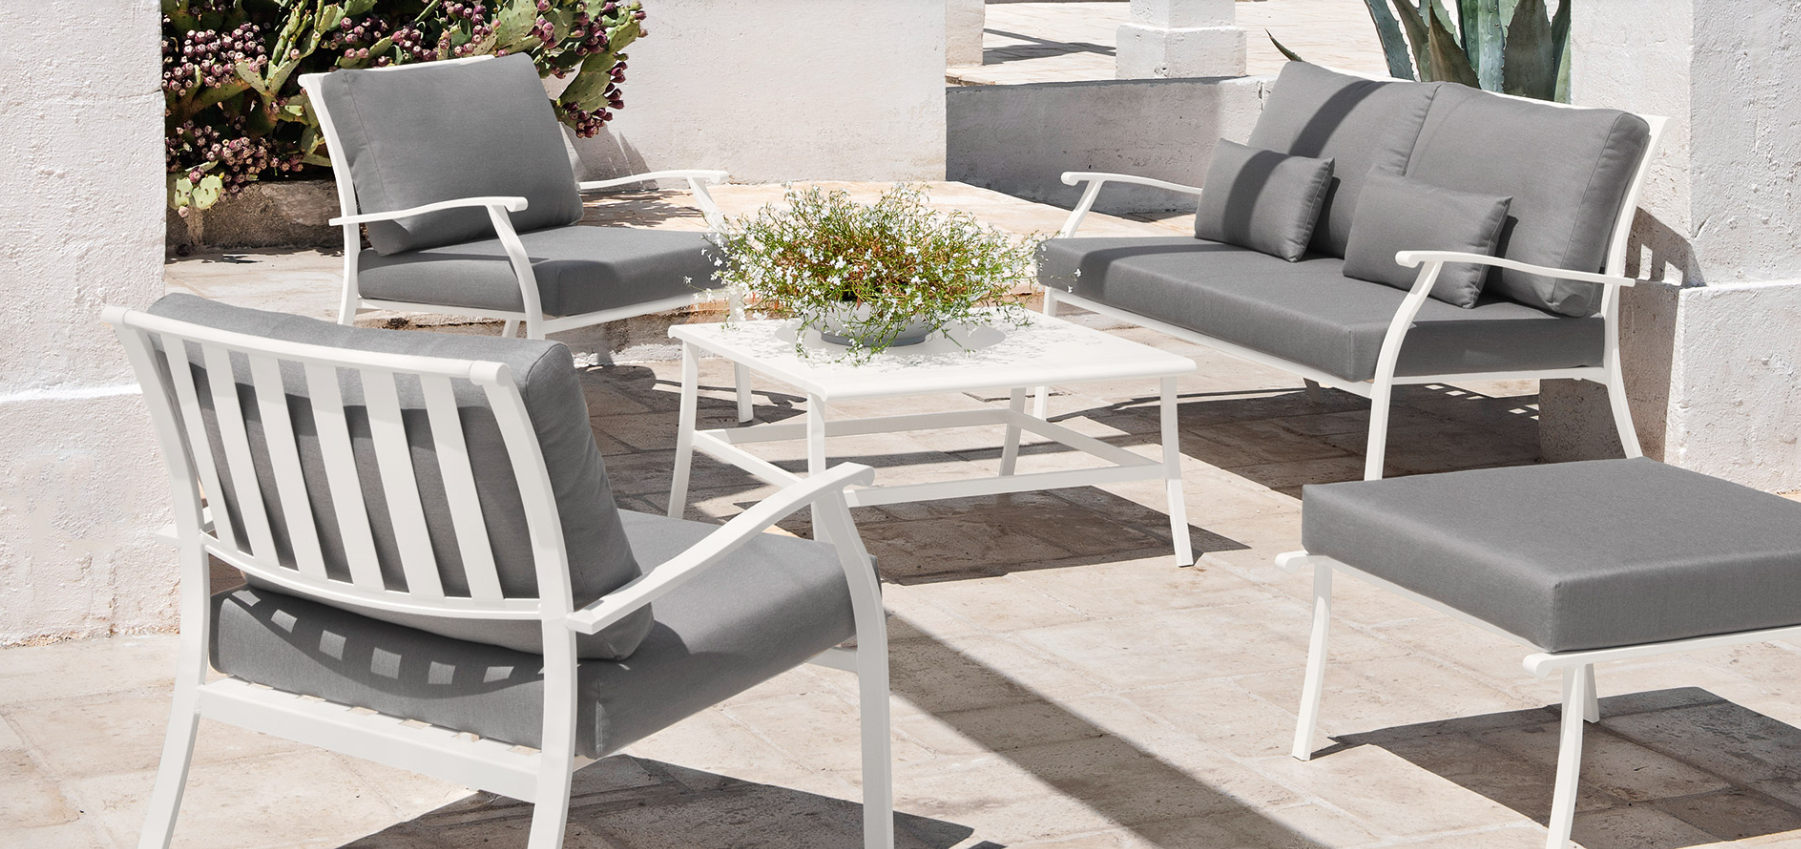 Elisir outdoor Lounge furniture from Ethimo